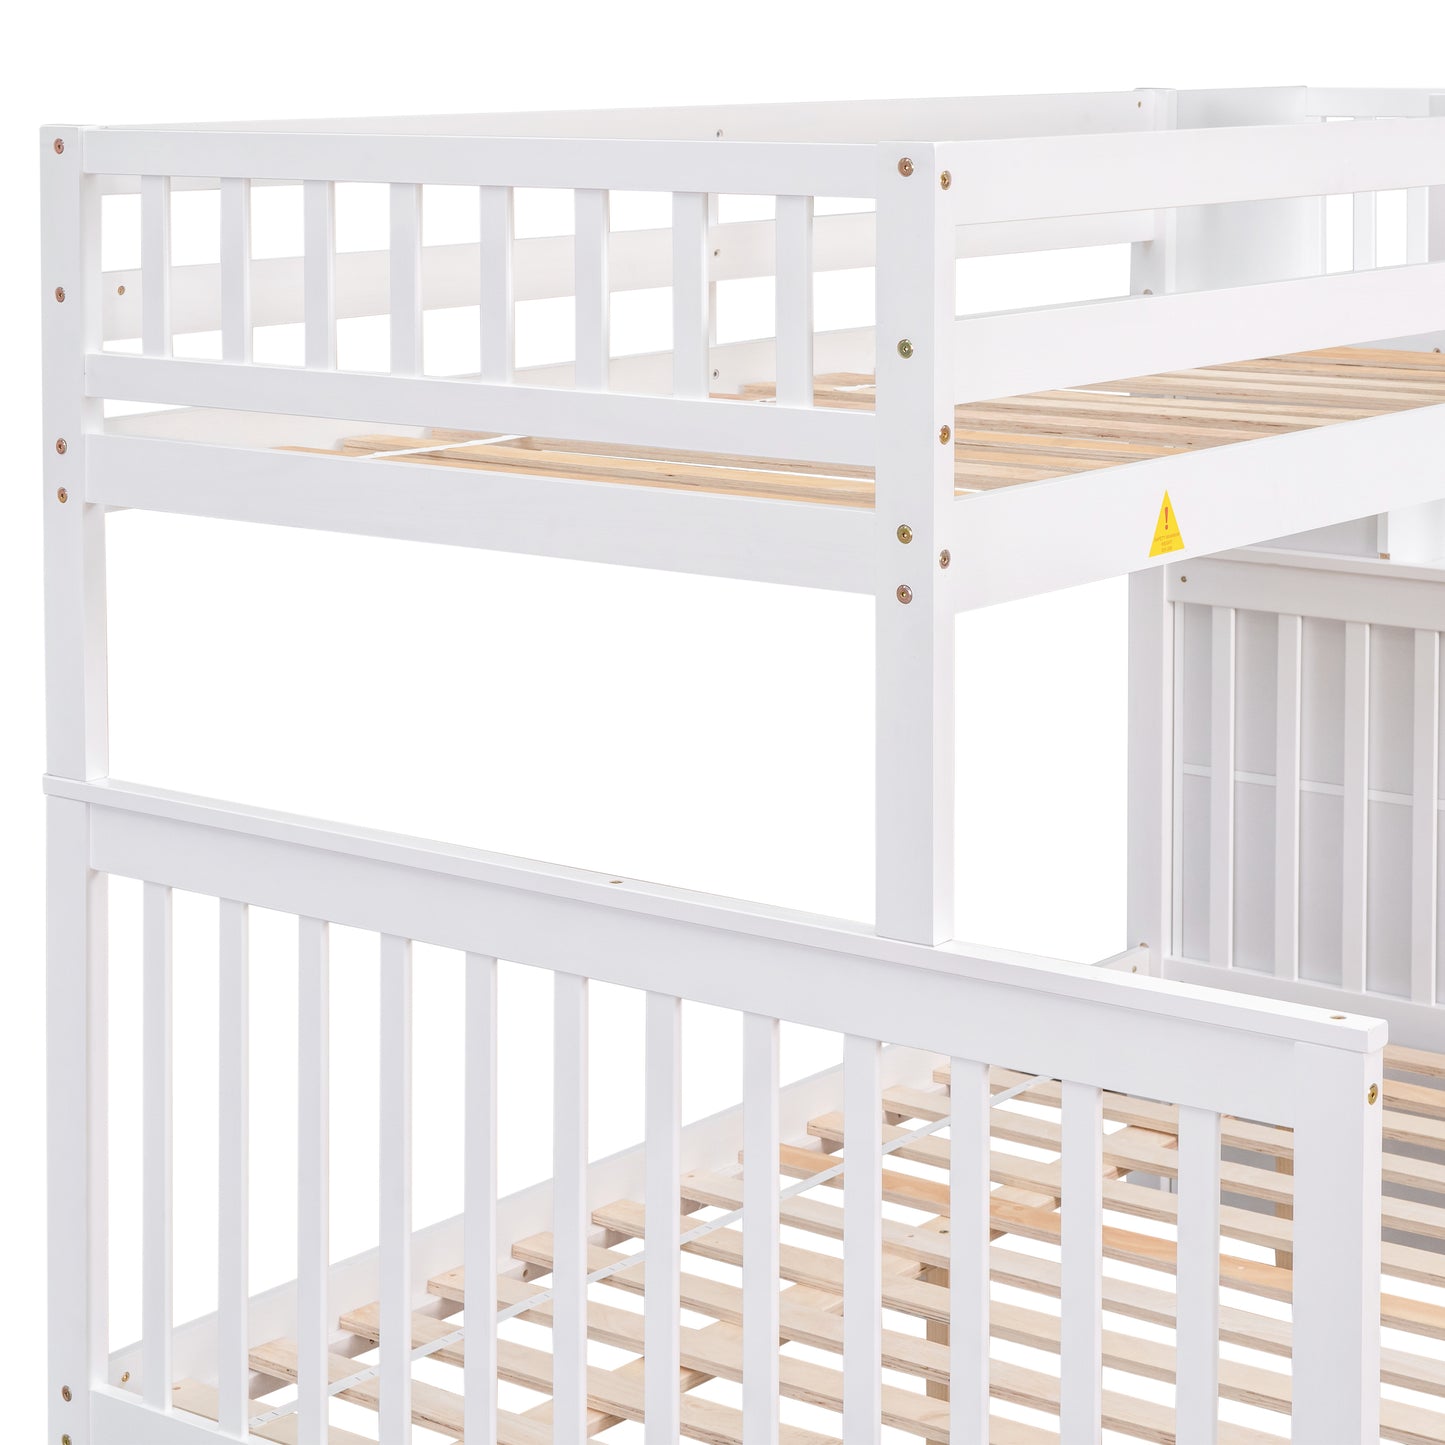 Twin Over Full Bunk Bed with 2 Drawers and Staircases, Convertible into 2 Beds, the Bunk Bed with Staircase and Safety Rails for Kids, Teens, Adults, White